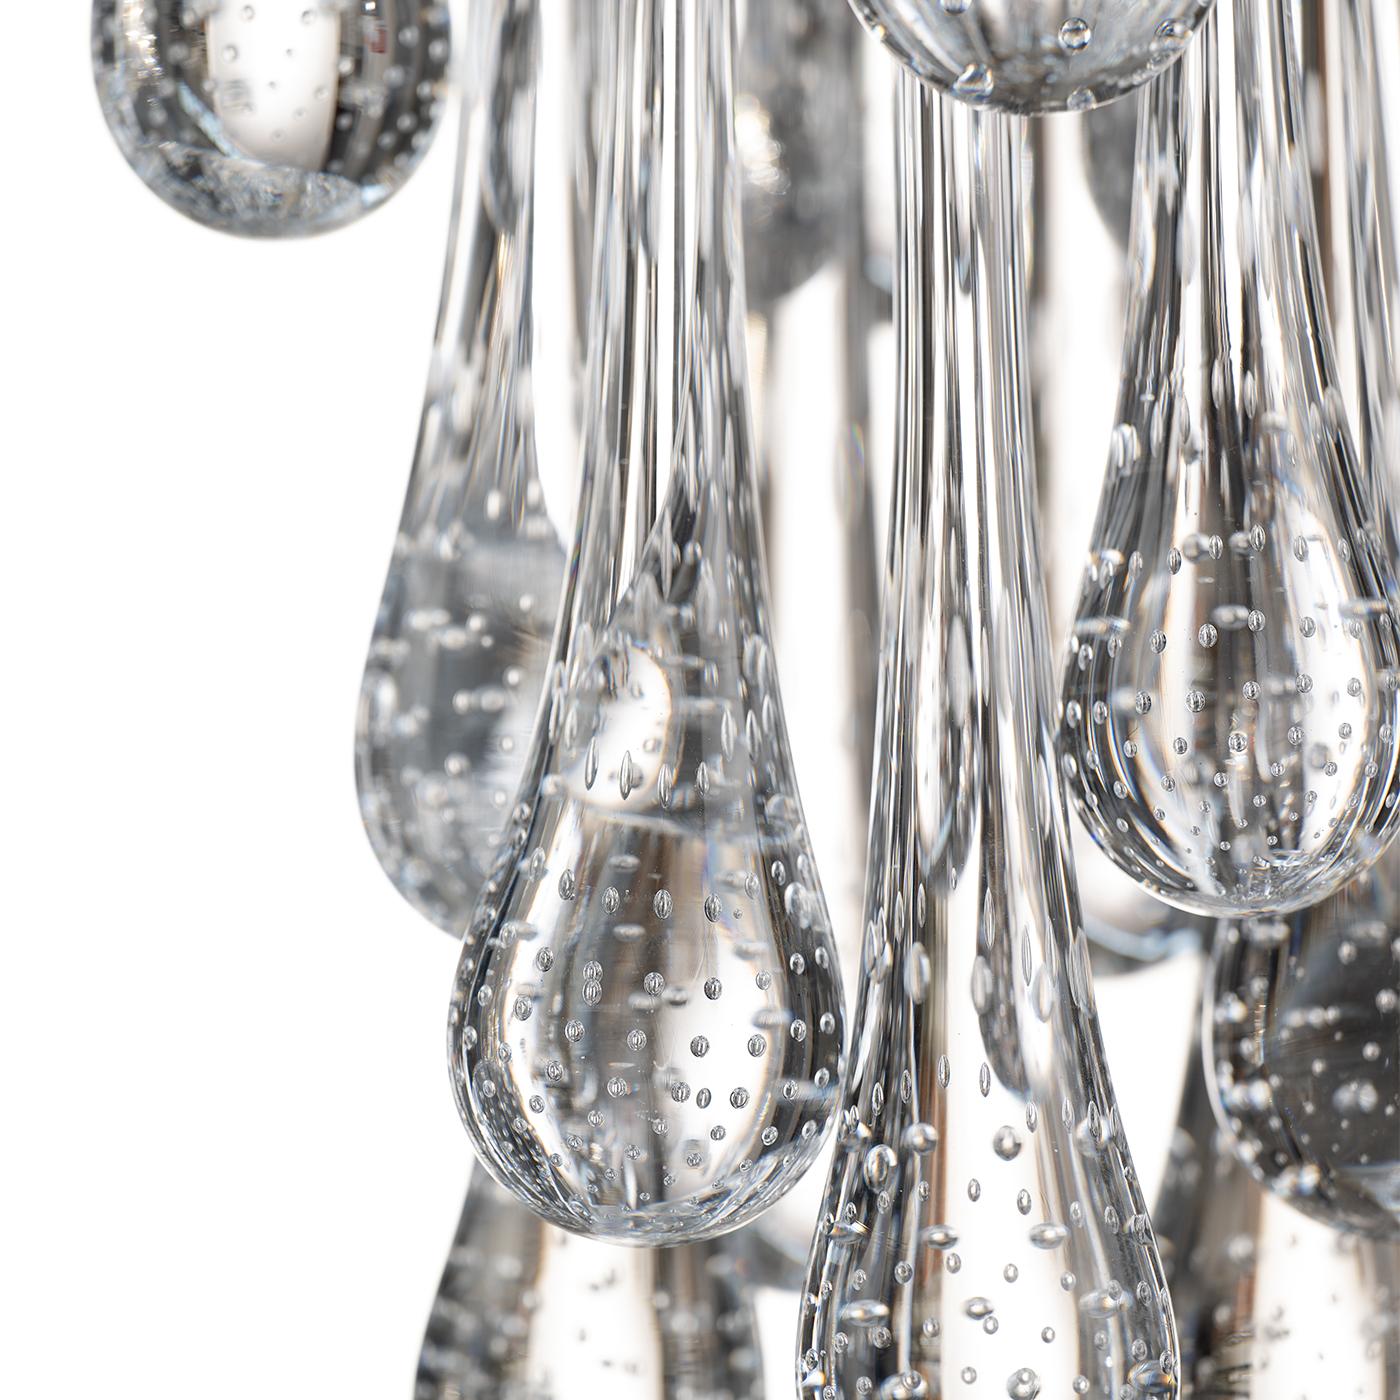 The poetic image of a dewy lane just before daybreak inspired this stunning chandelier. Mounted on a glistening golden-finished metal frame, three tiers of drop-shaped Murano glass elements splendidly diffuse the light, an effect enhanced by tiny